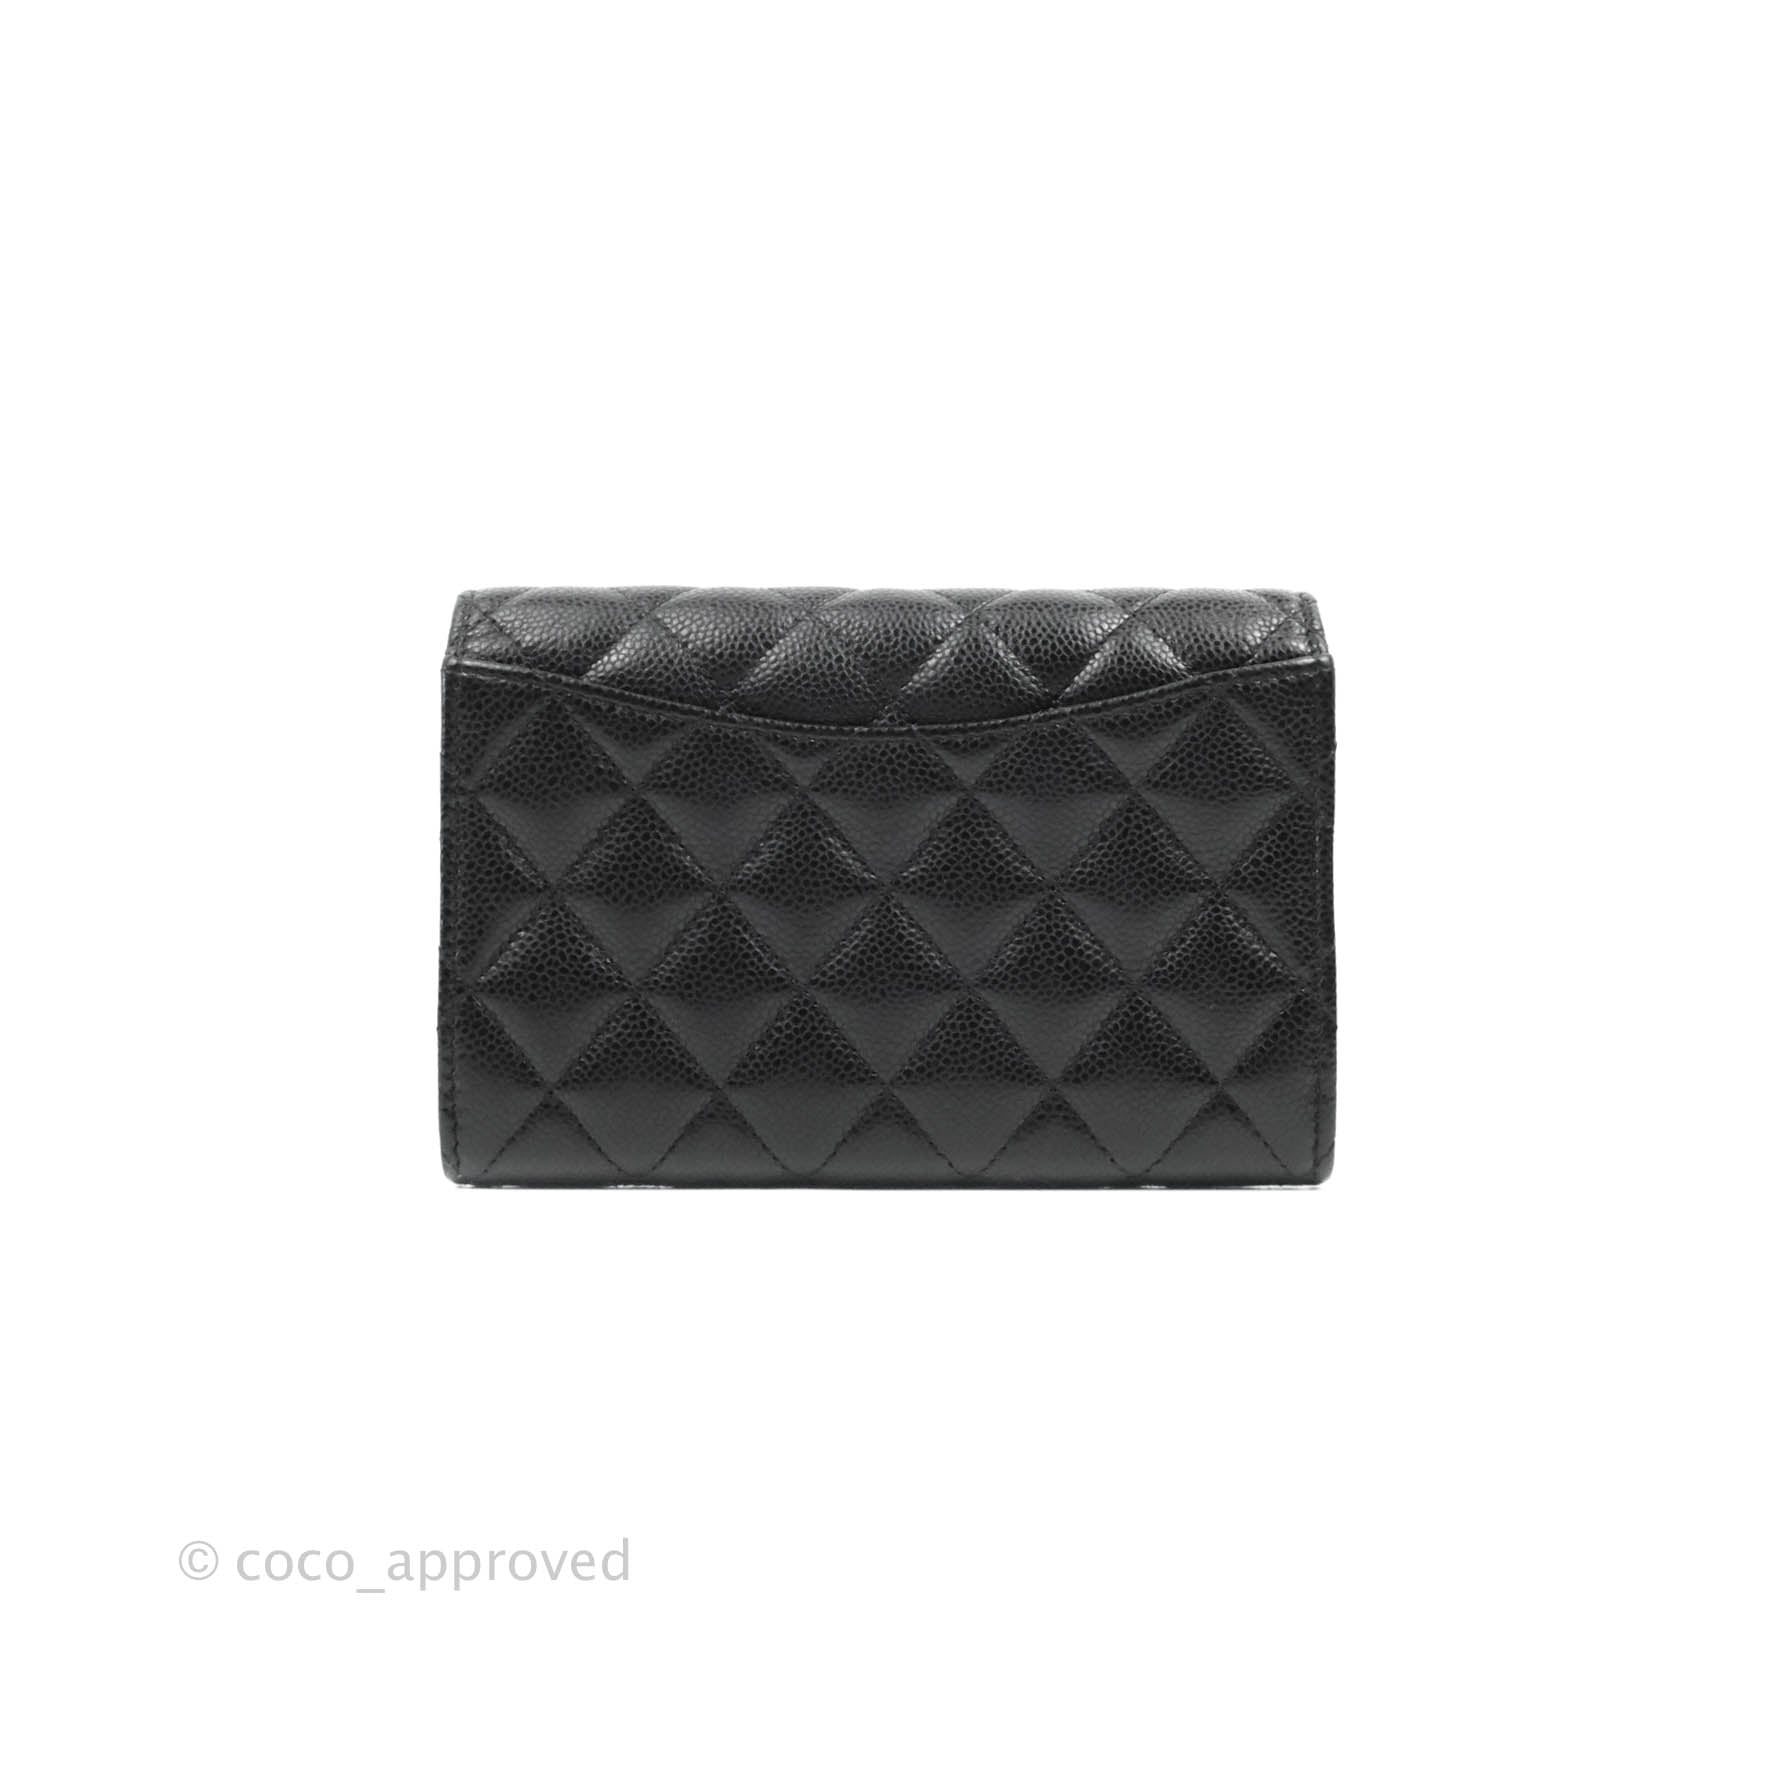 Chanel Black Quilted Leather Classic L Flap Wallet Chanel